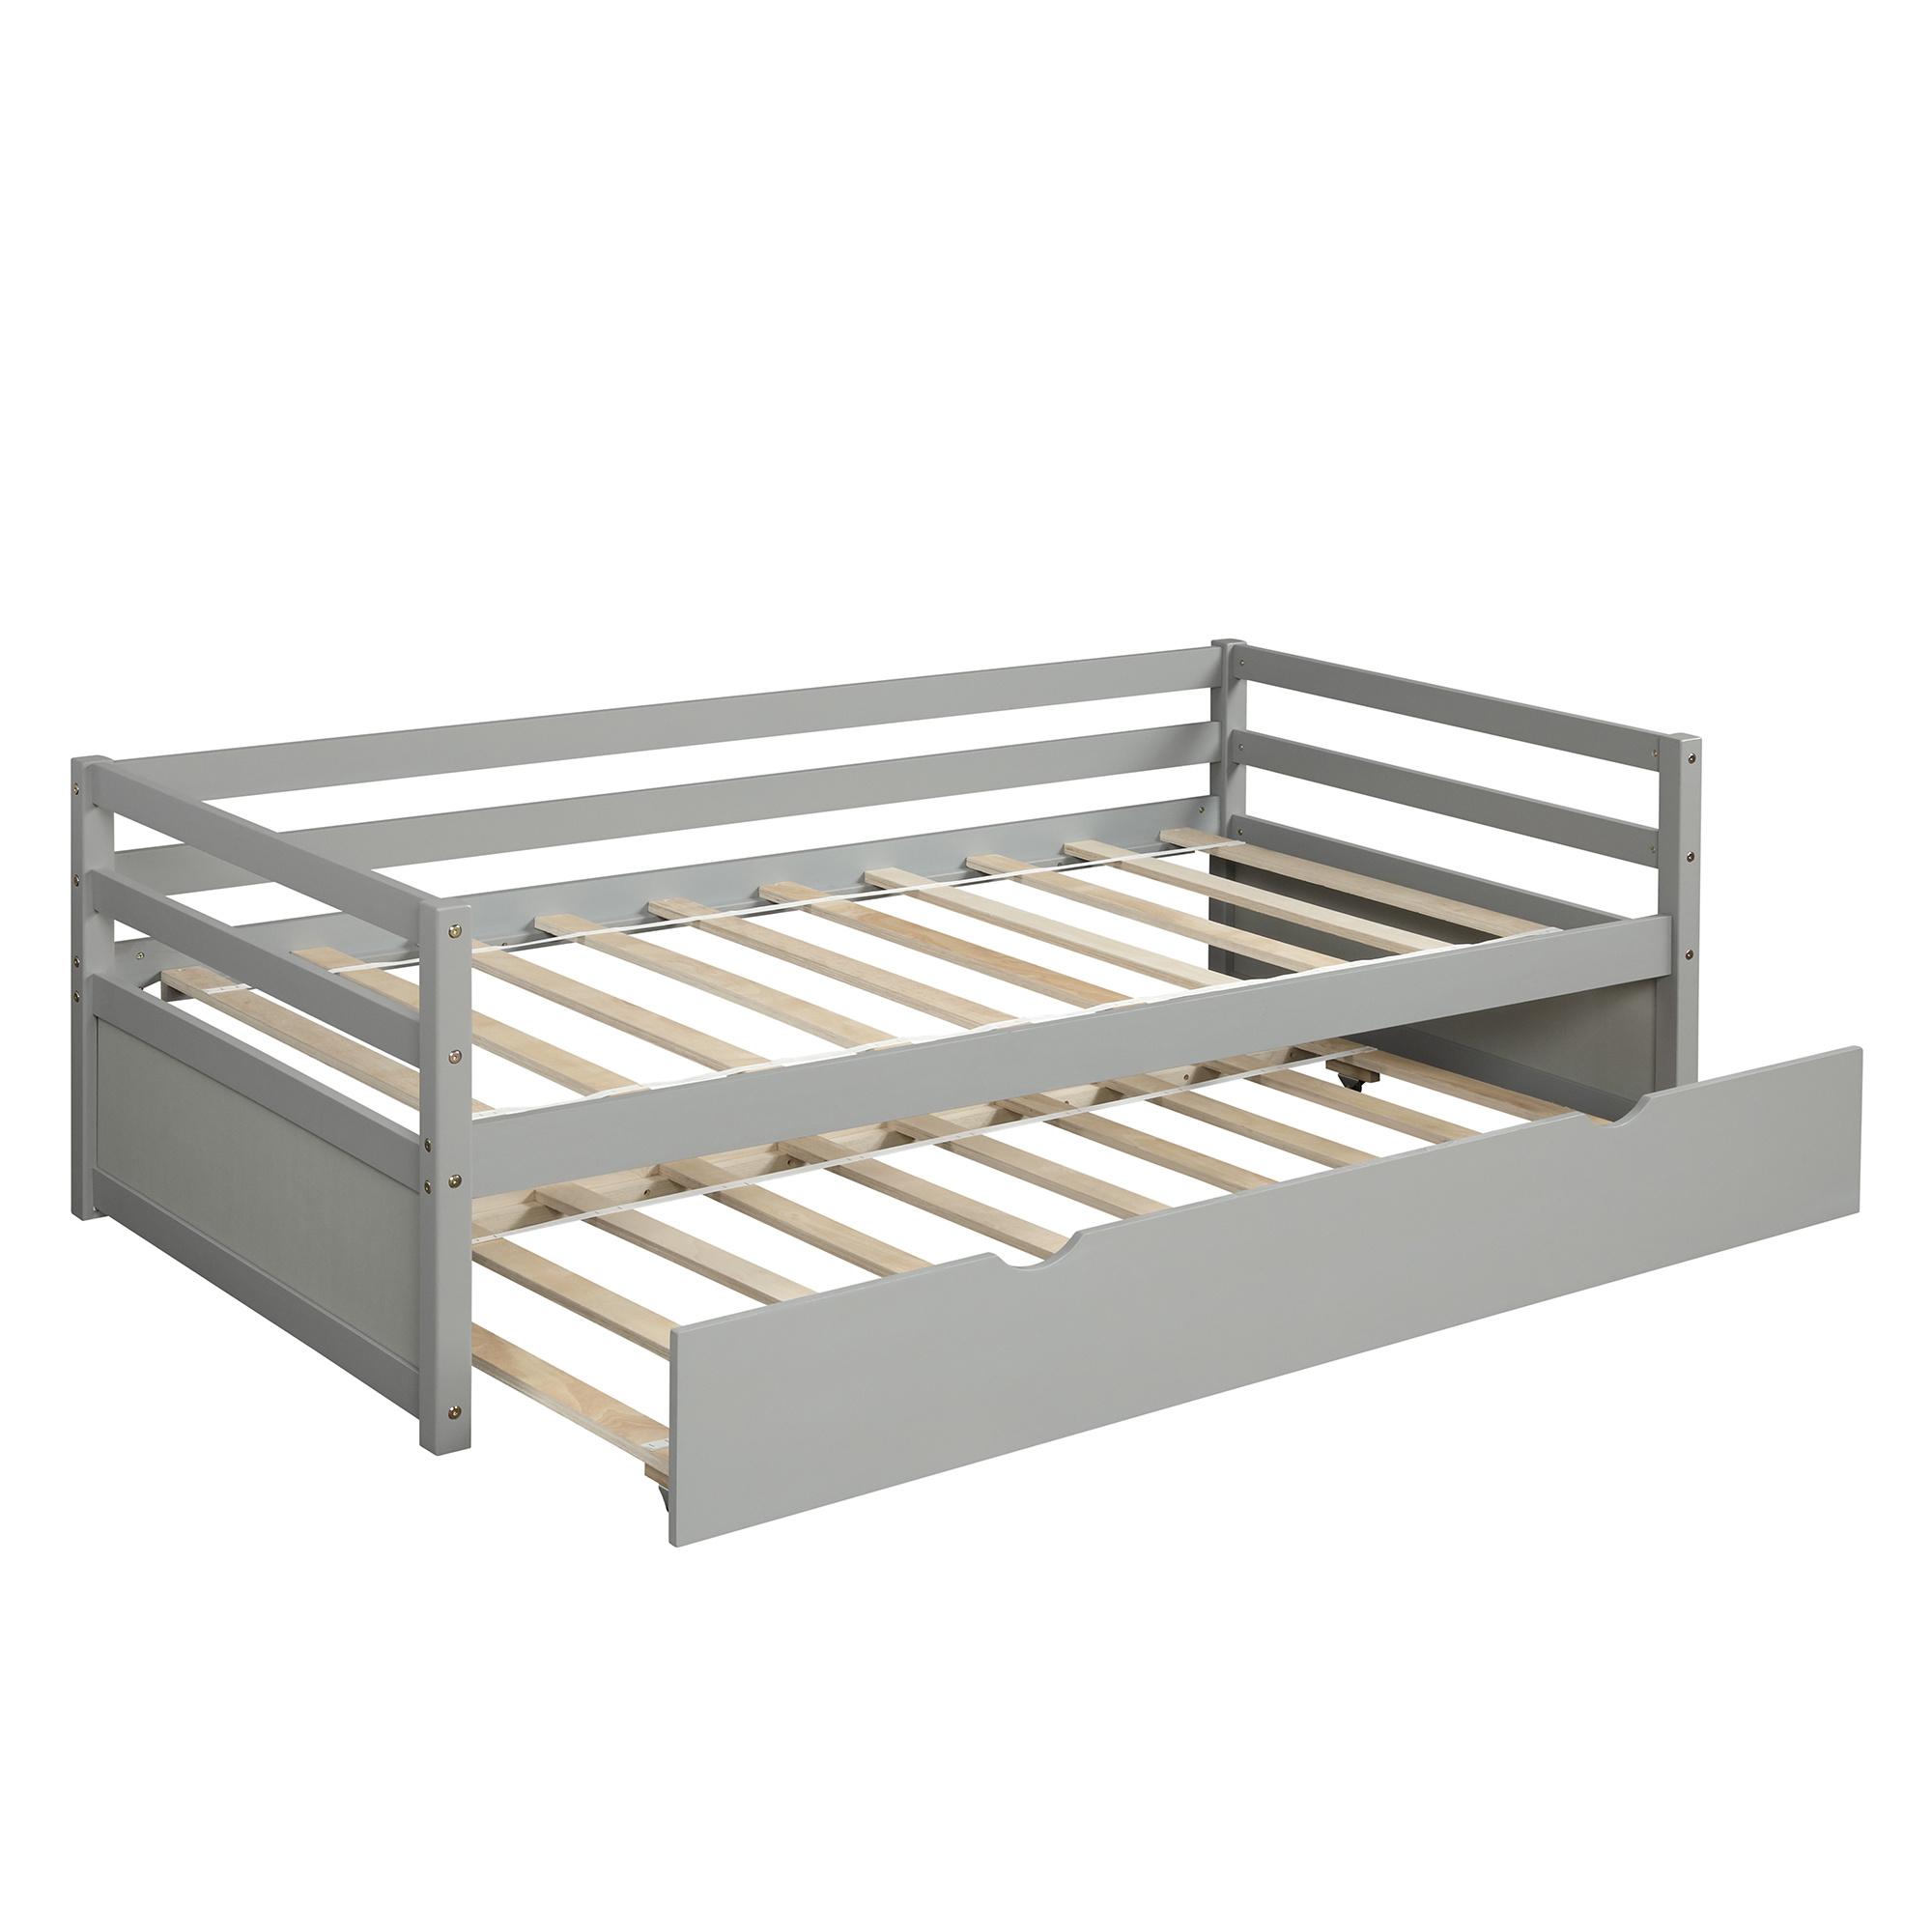 ARCTICSCORPION Twin Size Daybed with Pull Out Trundle,Wood Bed Frame with Backboard, Pull-out Combination Bed with Casters with Wooden Slat Support for Kids Room, No Box Spring Needed, Gray Finish - image 3 of 7